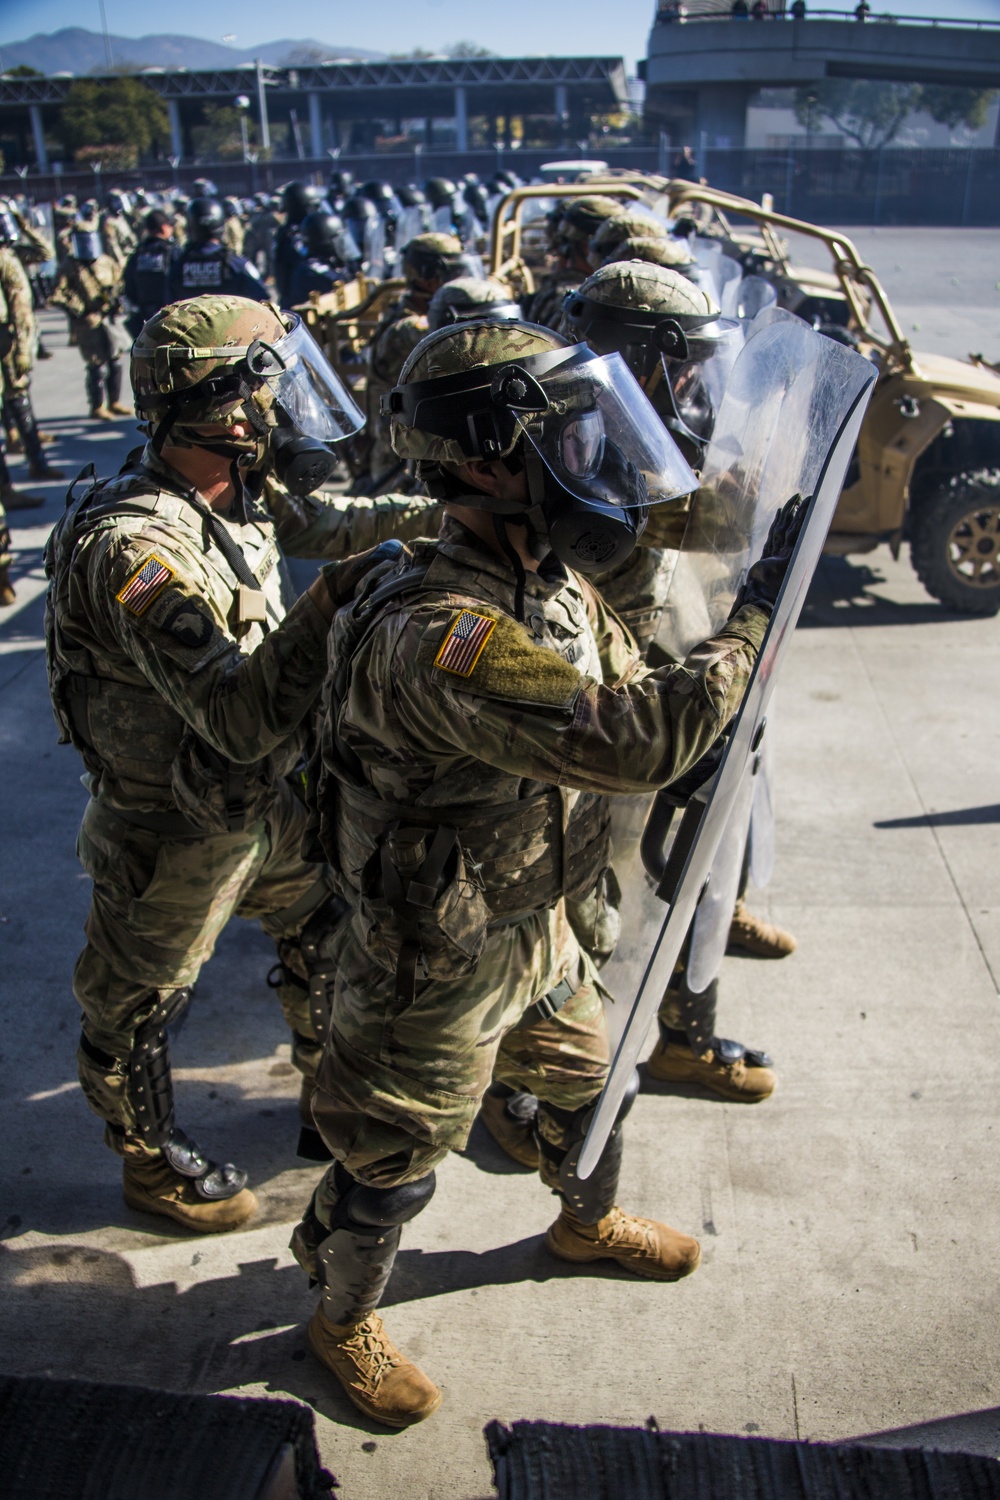 U.S. Soldiers and U.S. Customs and Border Protection conduct civil disturbance training at Otay Mesa Port of Entry